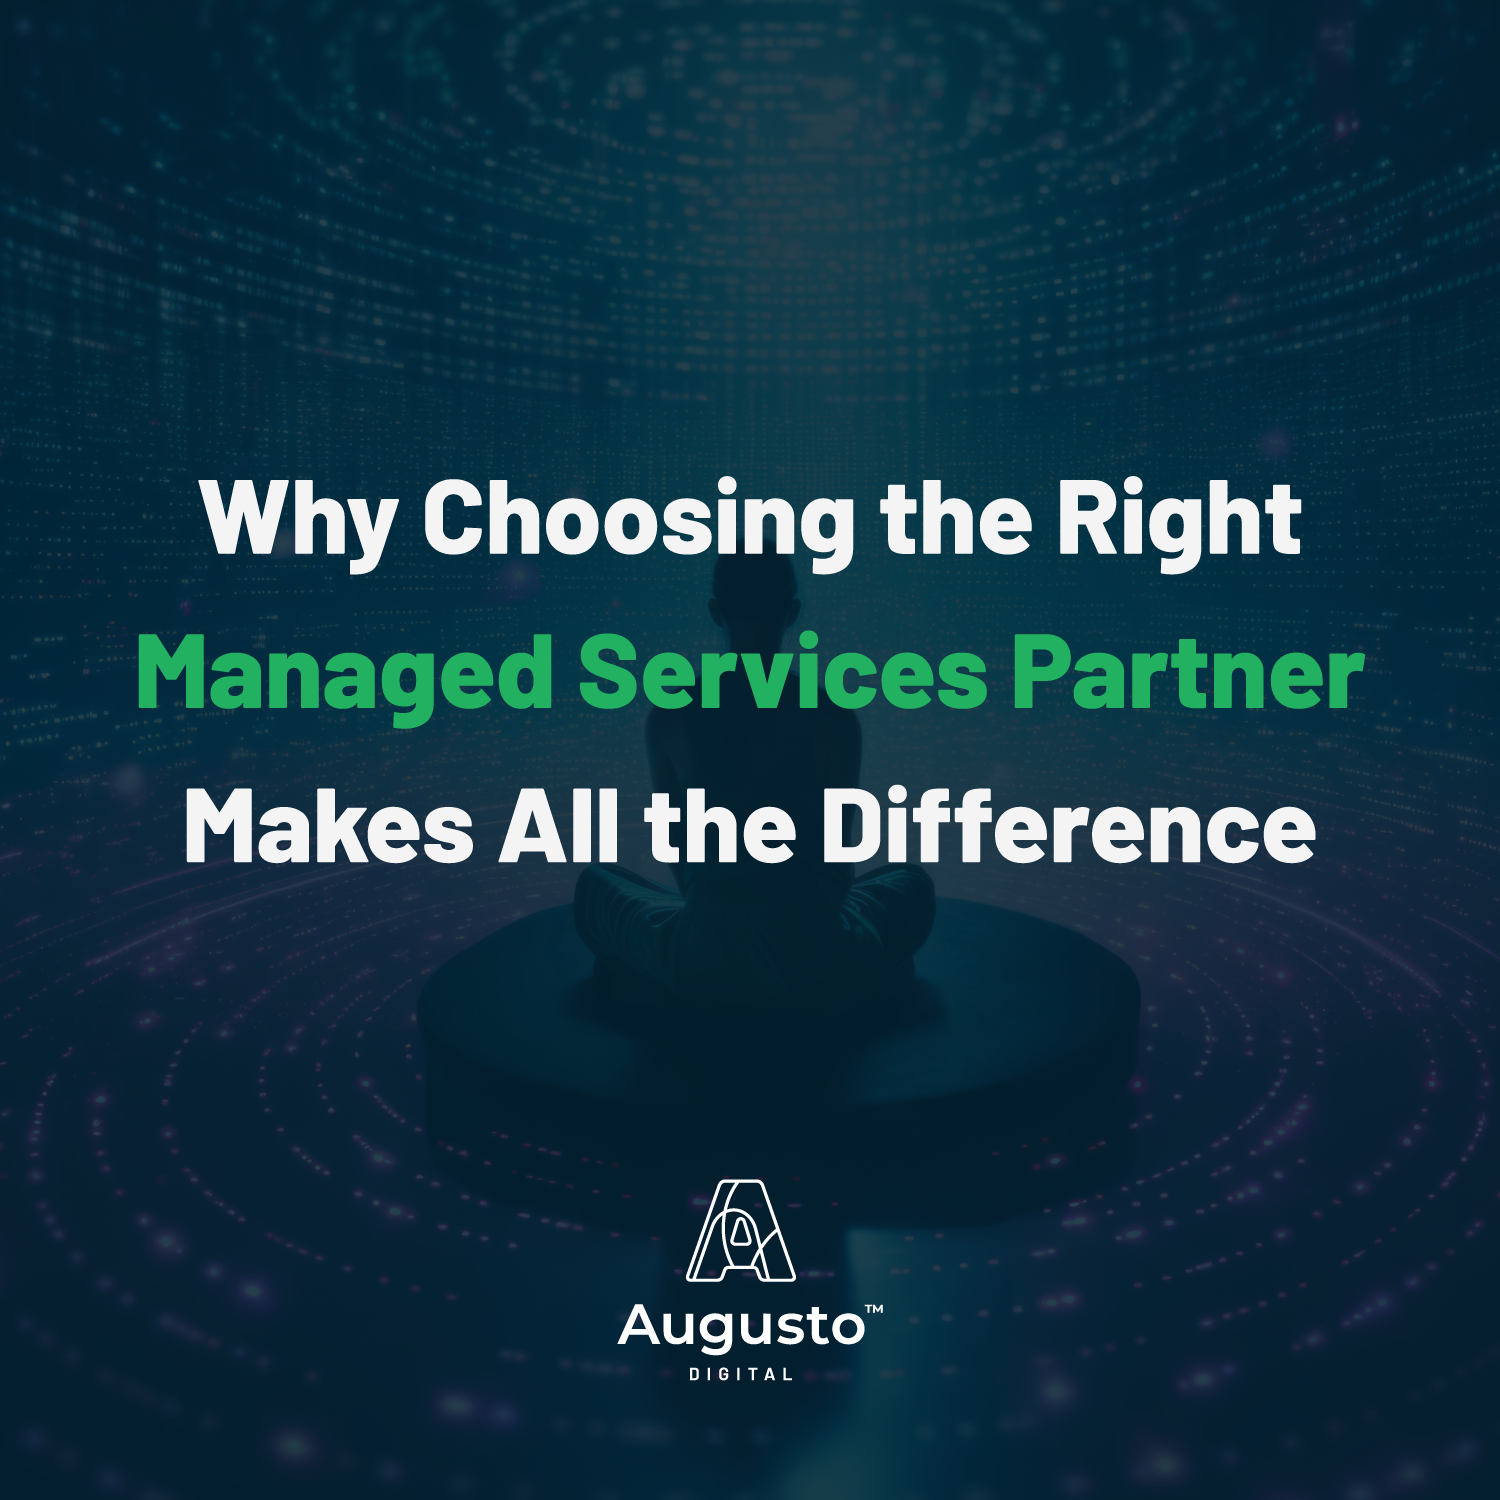 Why choosing the right managed services partner makes all the difference